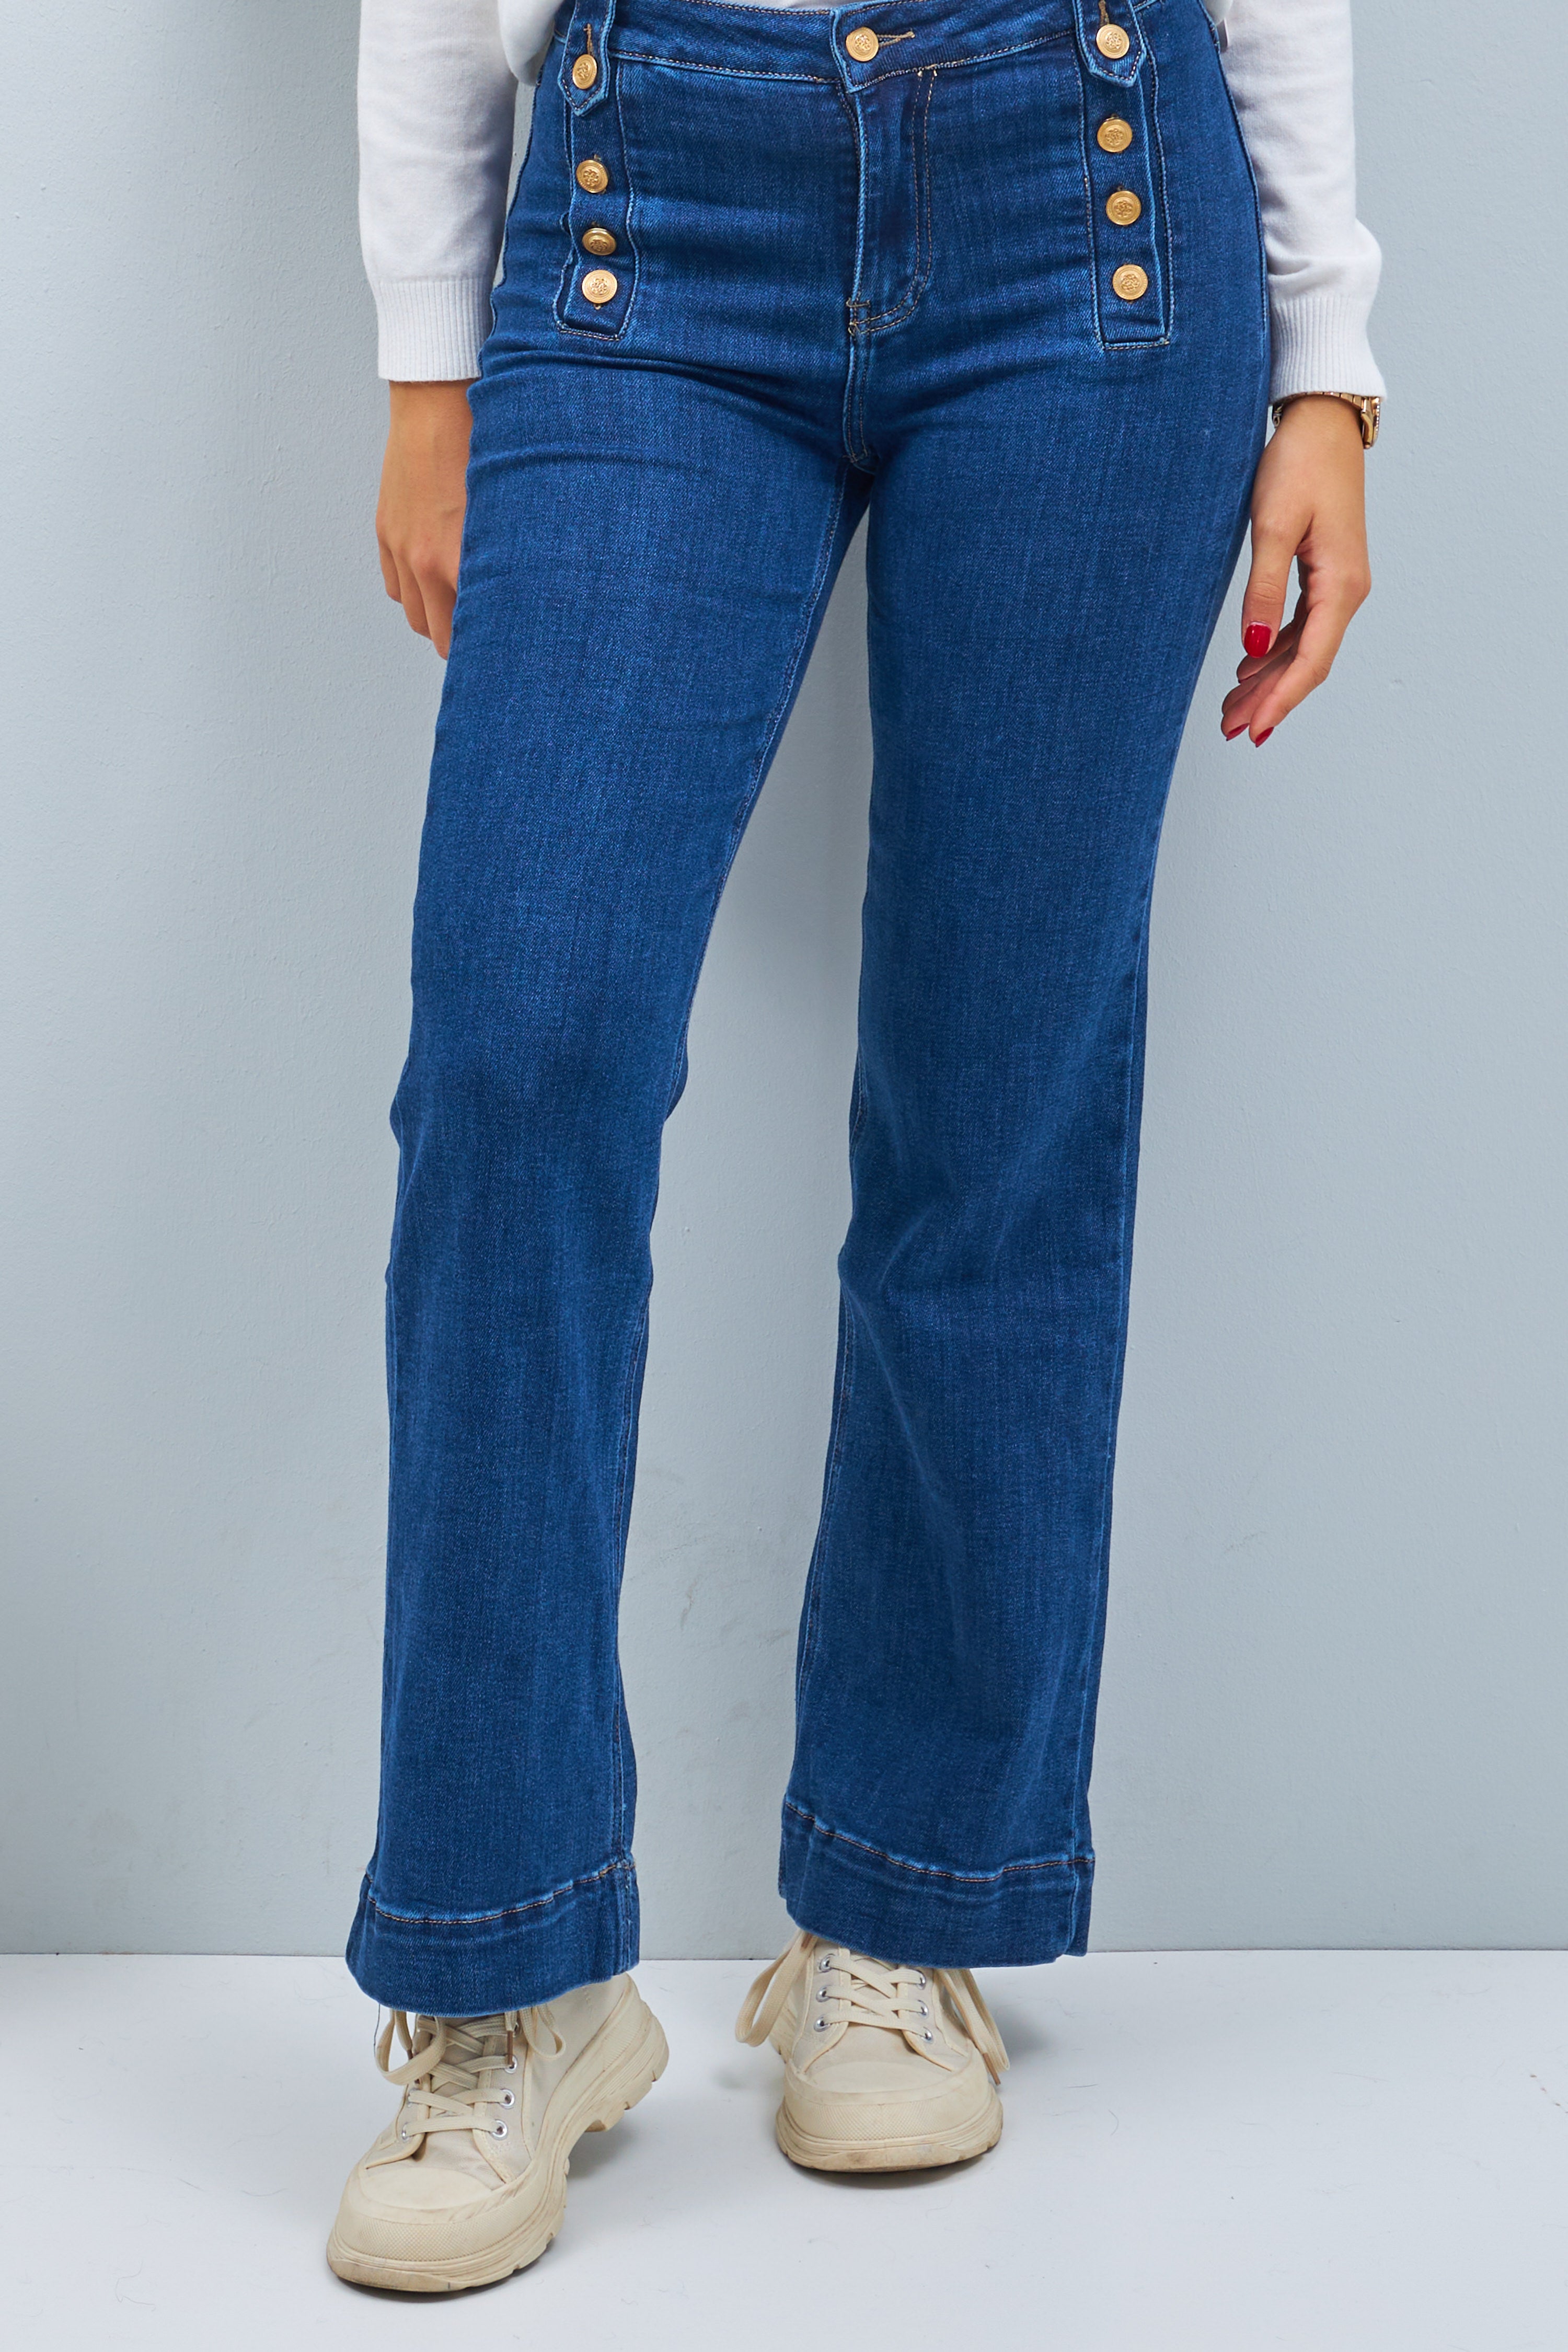 Jeans with decorative buttons on the sides, blue